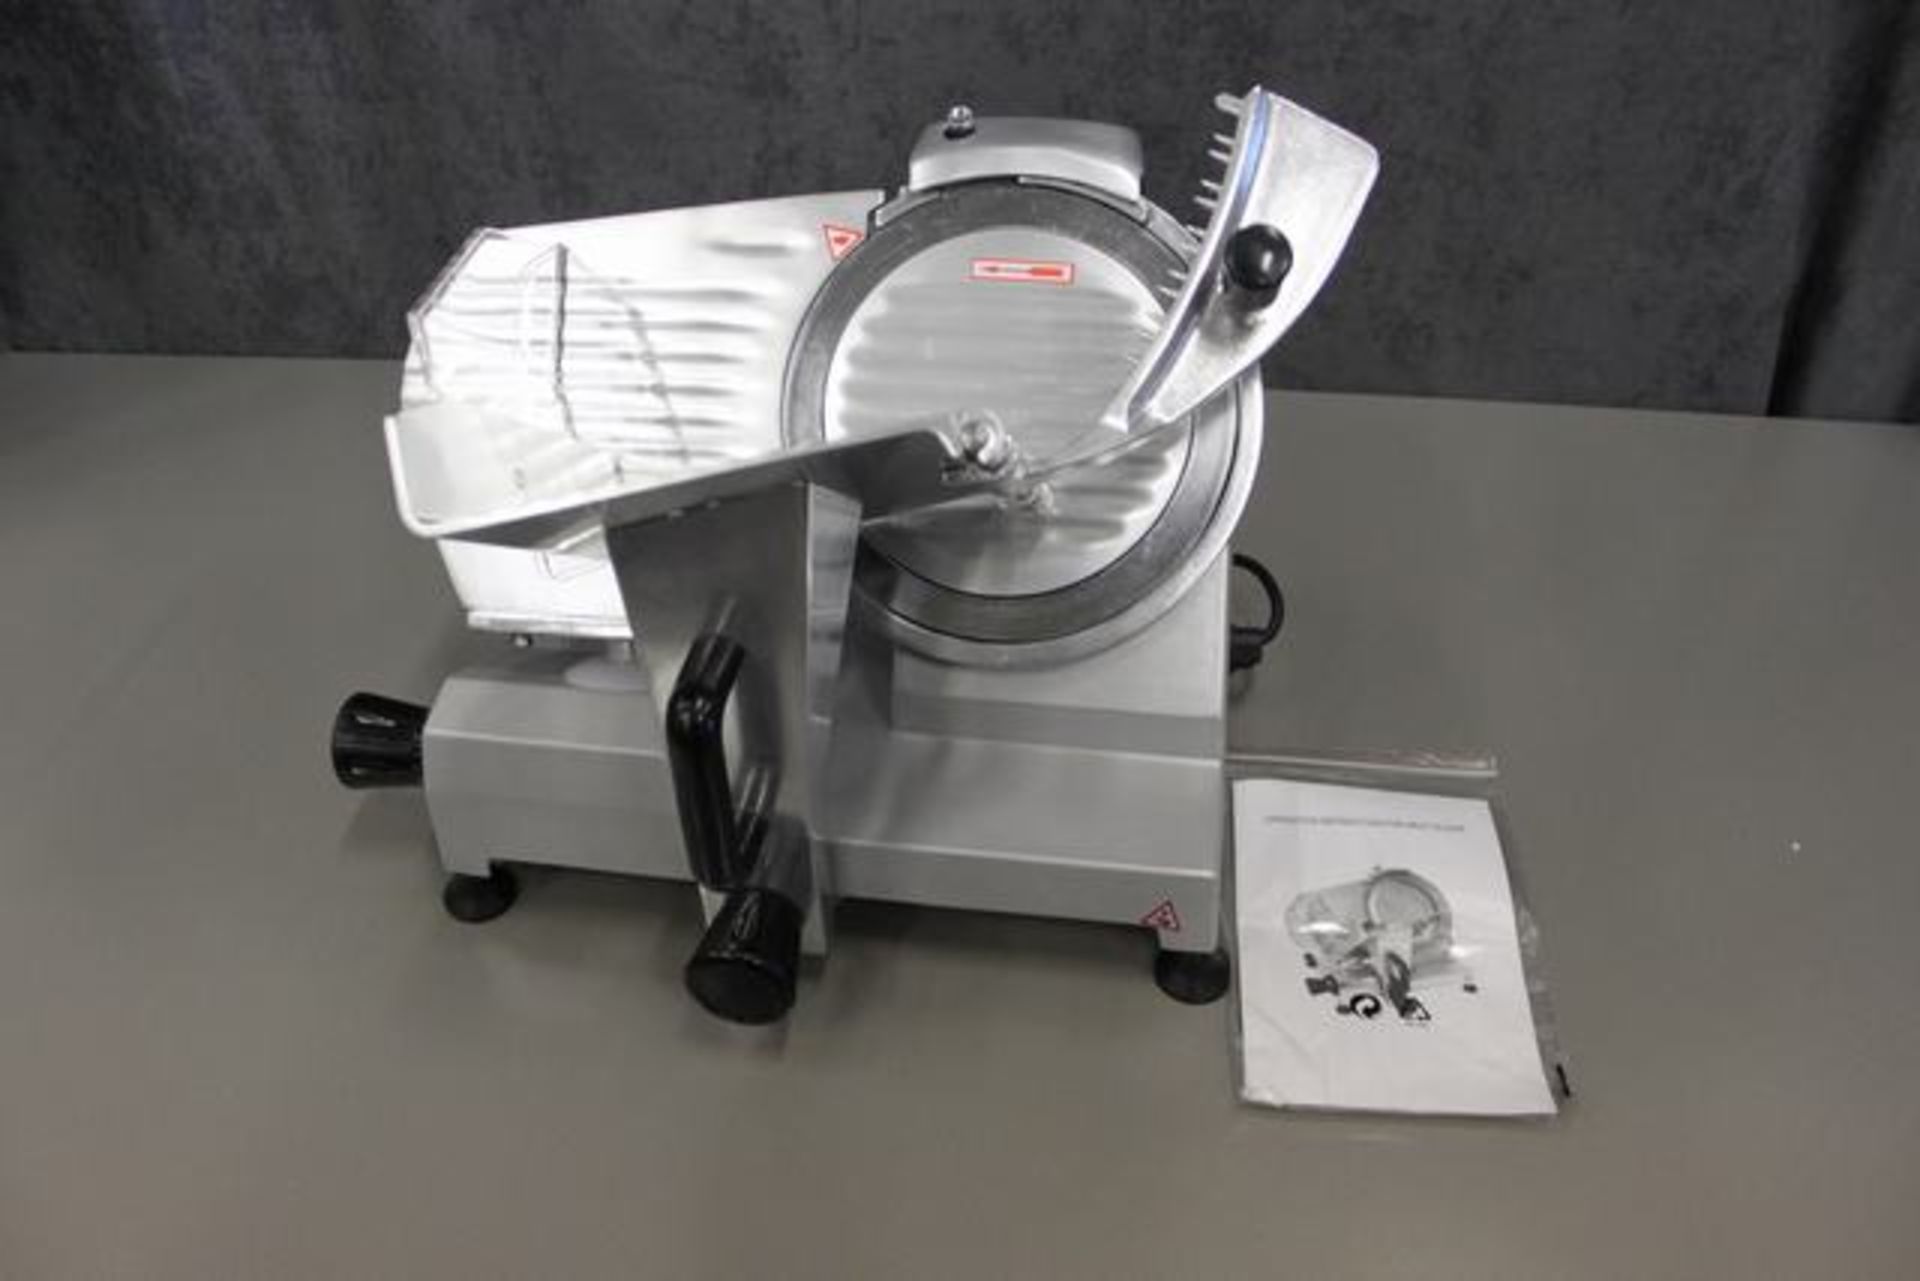 Gravity 220S Automatic Meat Slicer - a high quality gravity feed slicer with a chromed steel blade